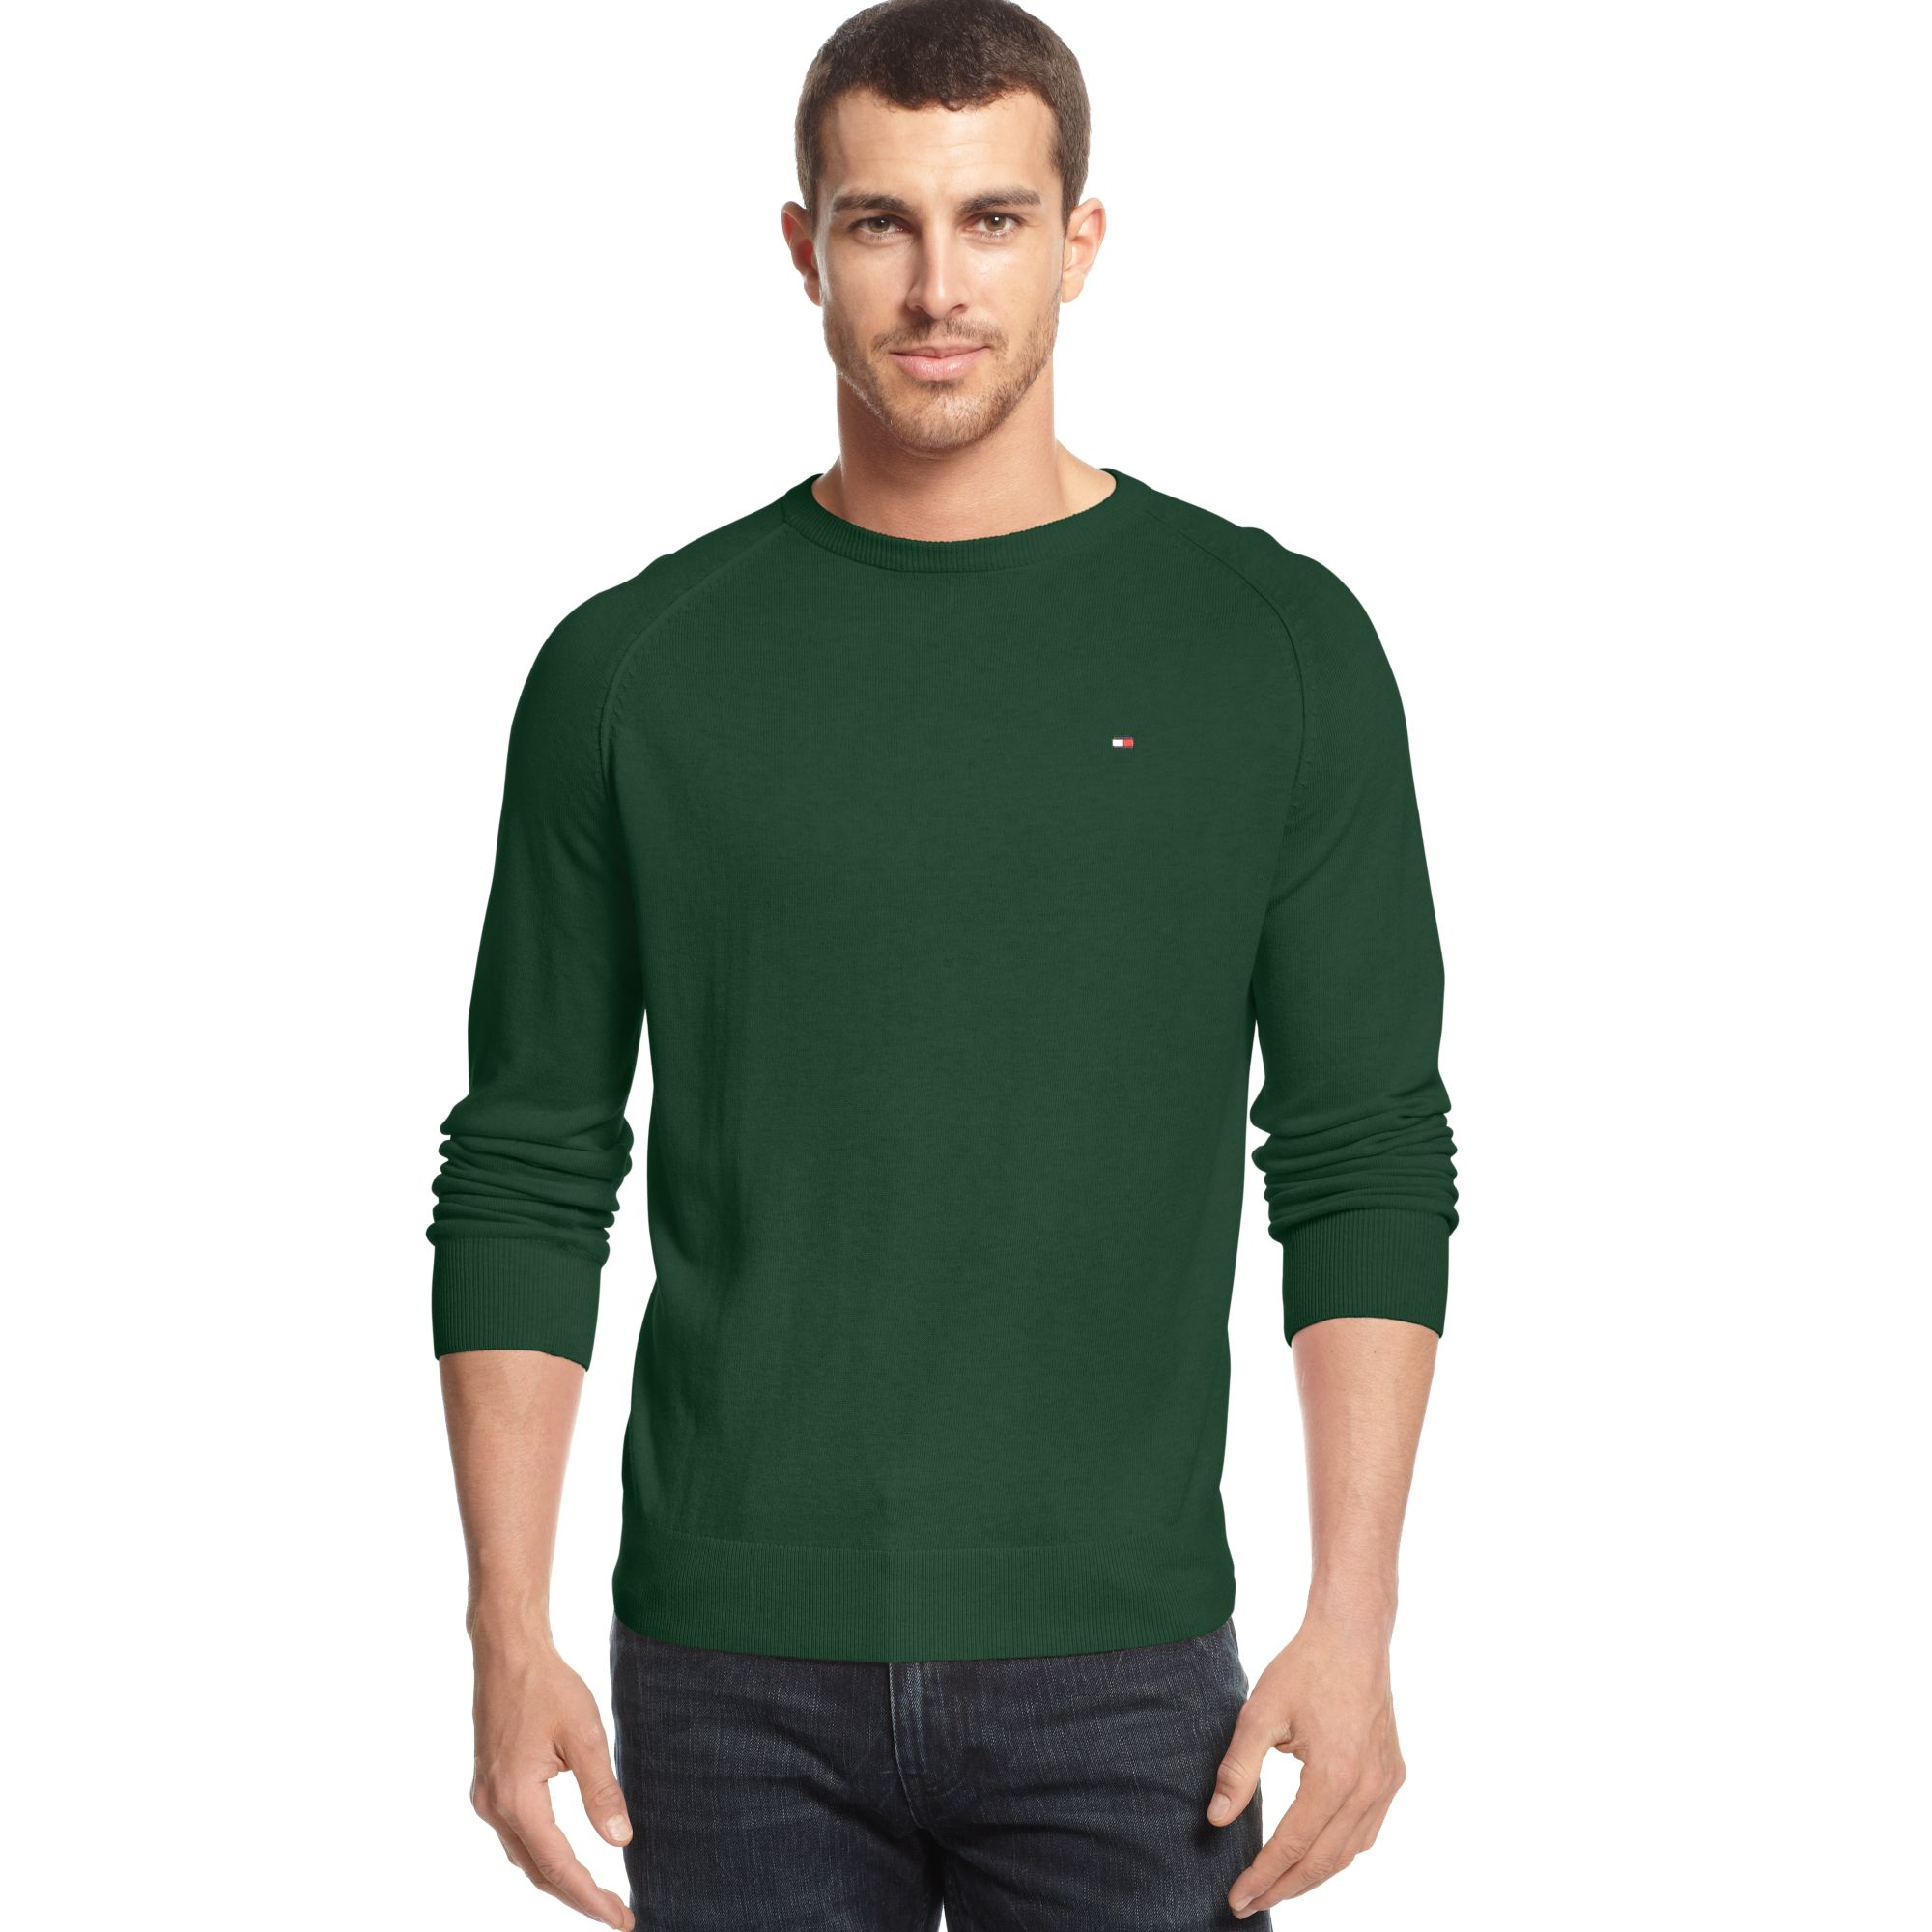 Lyst - Tommy Hilfiger American Crewneck Sweater in Green for Men